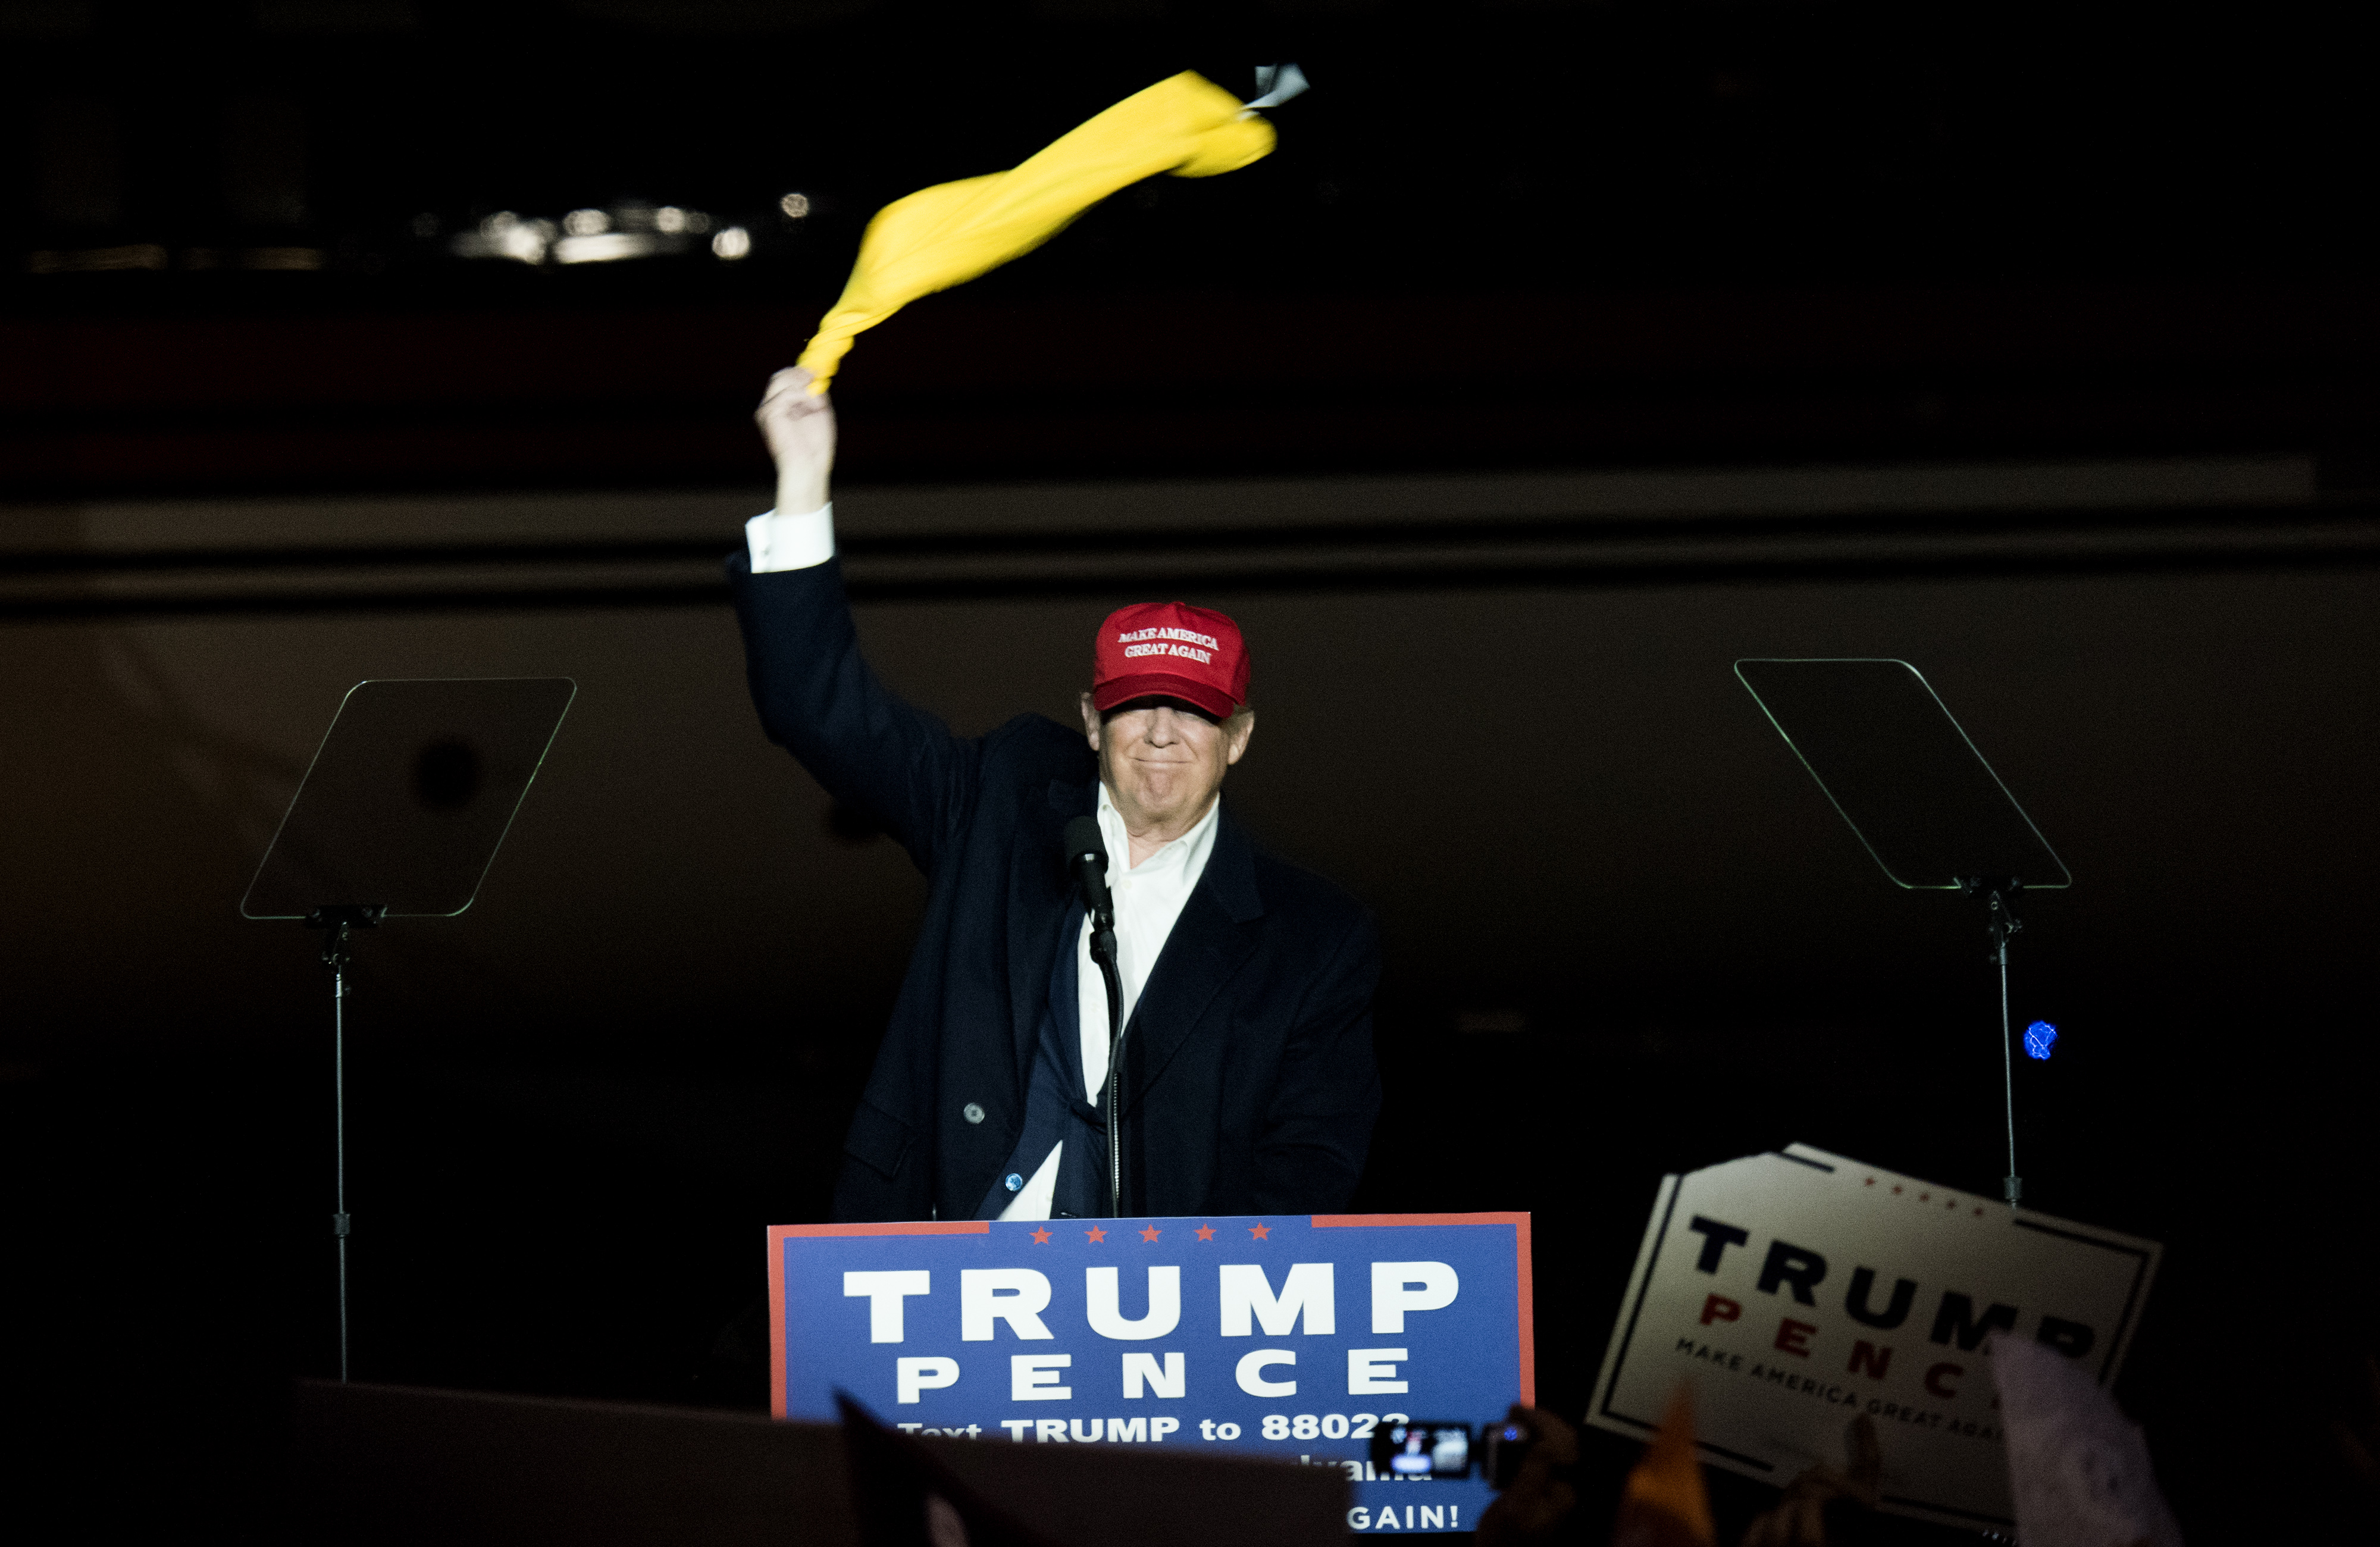 Donald Trump, 2016 Republican presidential nominee, gestures as he speaks during a campaign rally in Moon Township, Penn., on Nov. 6, 2016.